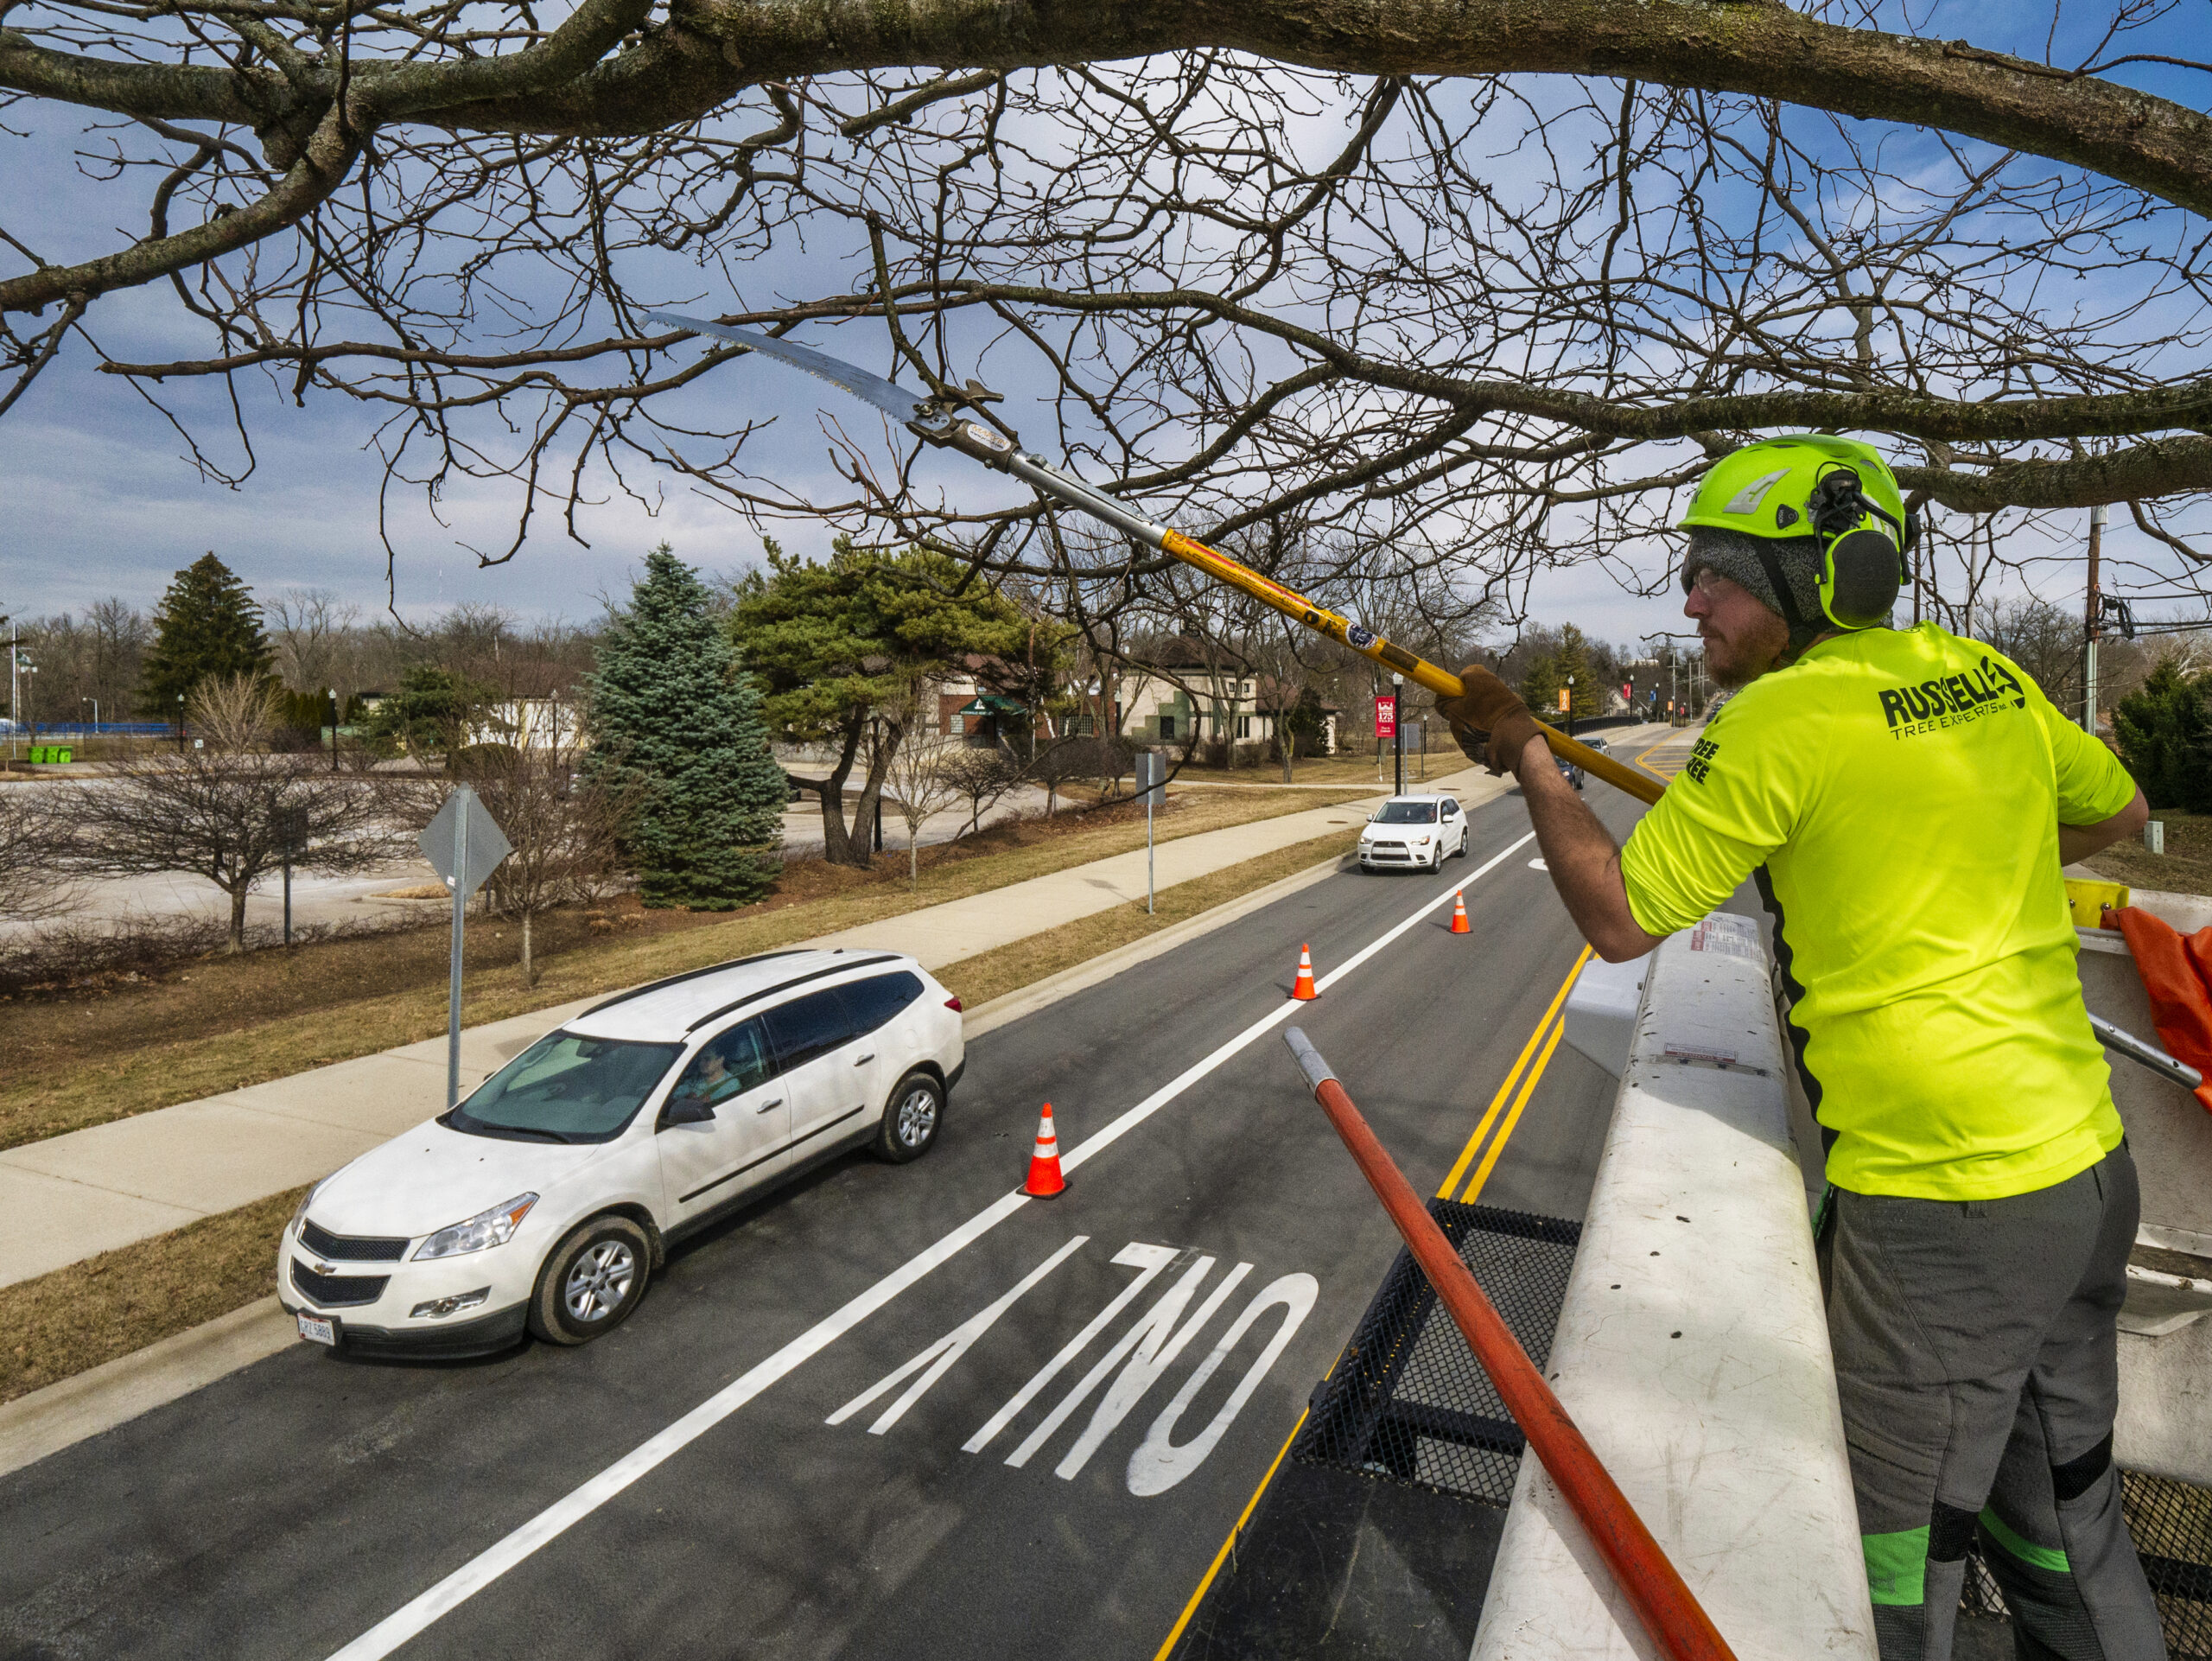 A tree trimmer reaches stretches cut away a dead, damaged, or disruptive branch from a tree near the bridge over Alum Creek on West Main Street. My Final Photo for March 1, 2022.